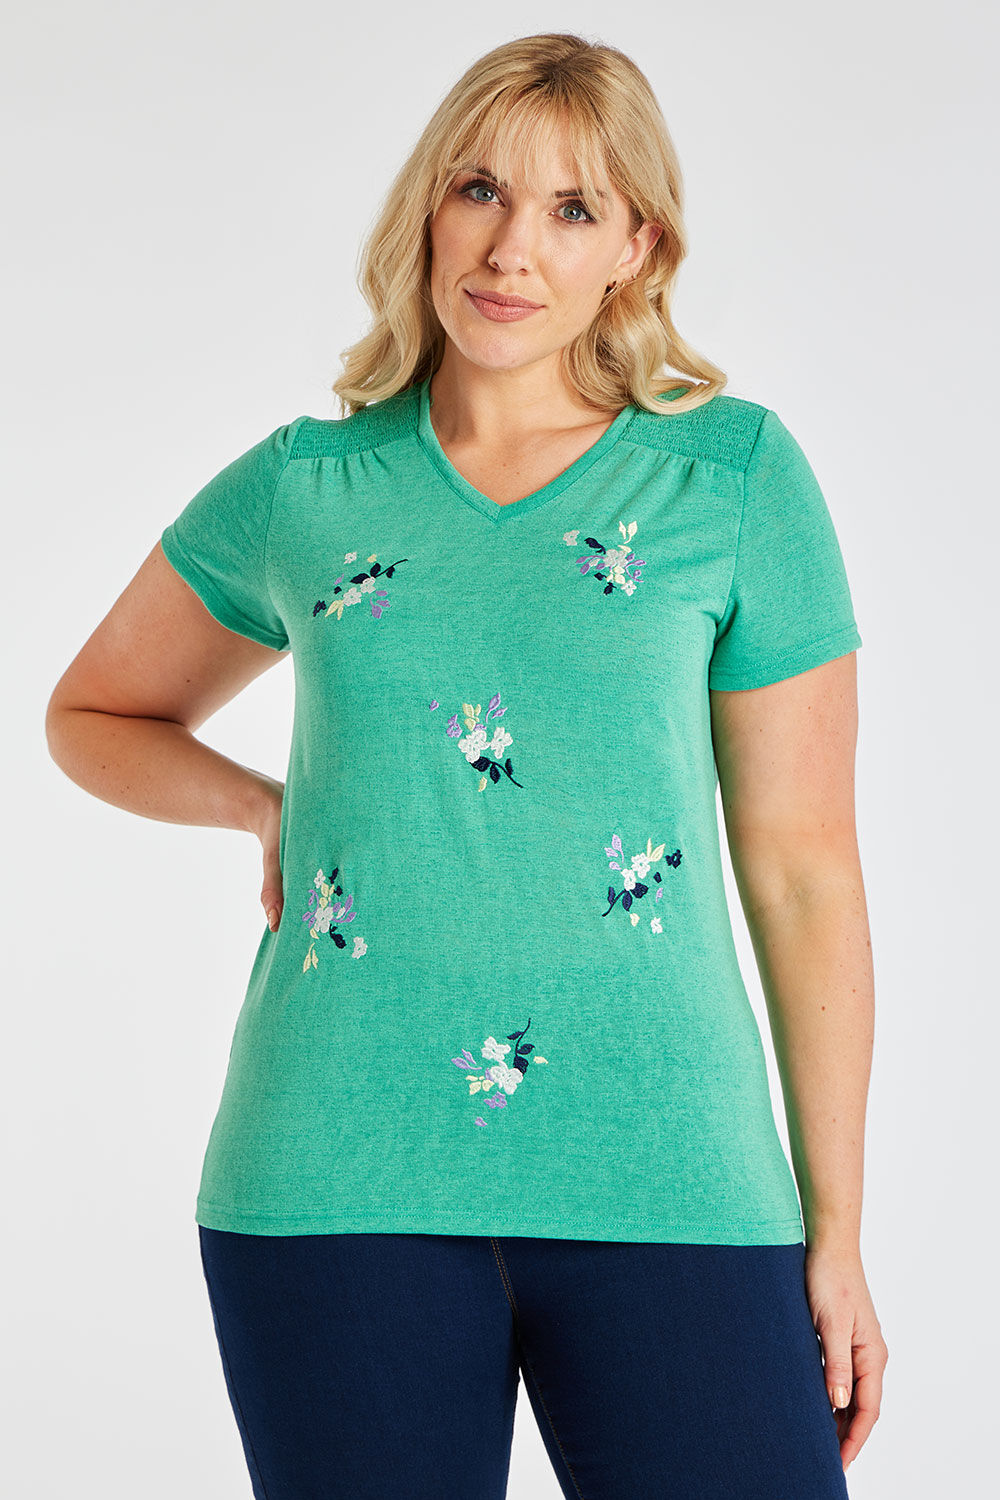 Bonmarche Green Short Sleeves Embroidered Flower T-Shirt, Size: 14